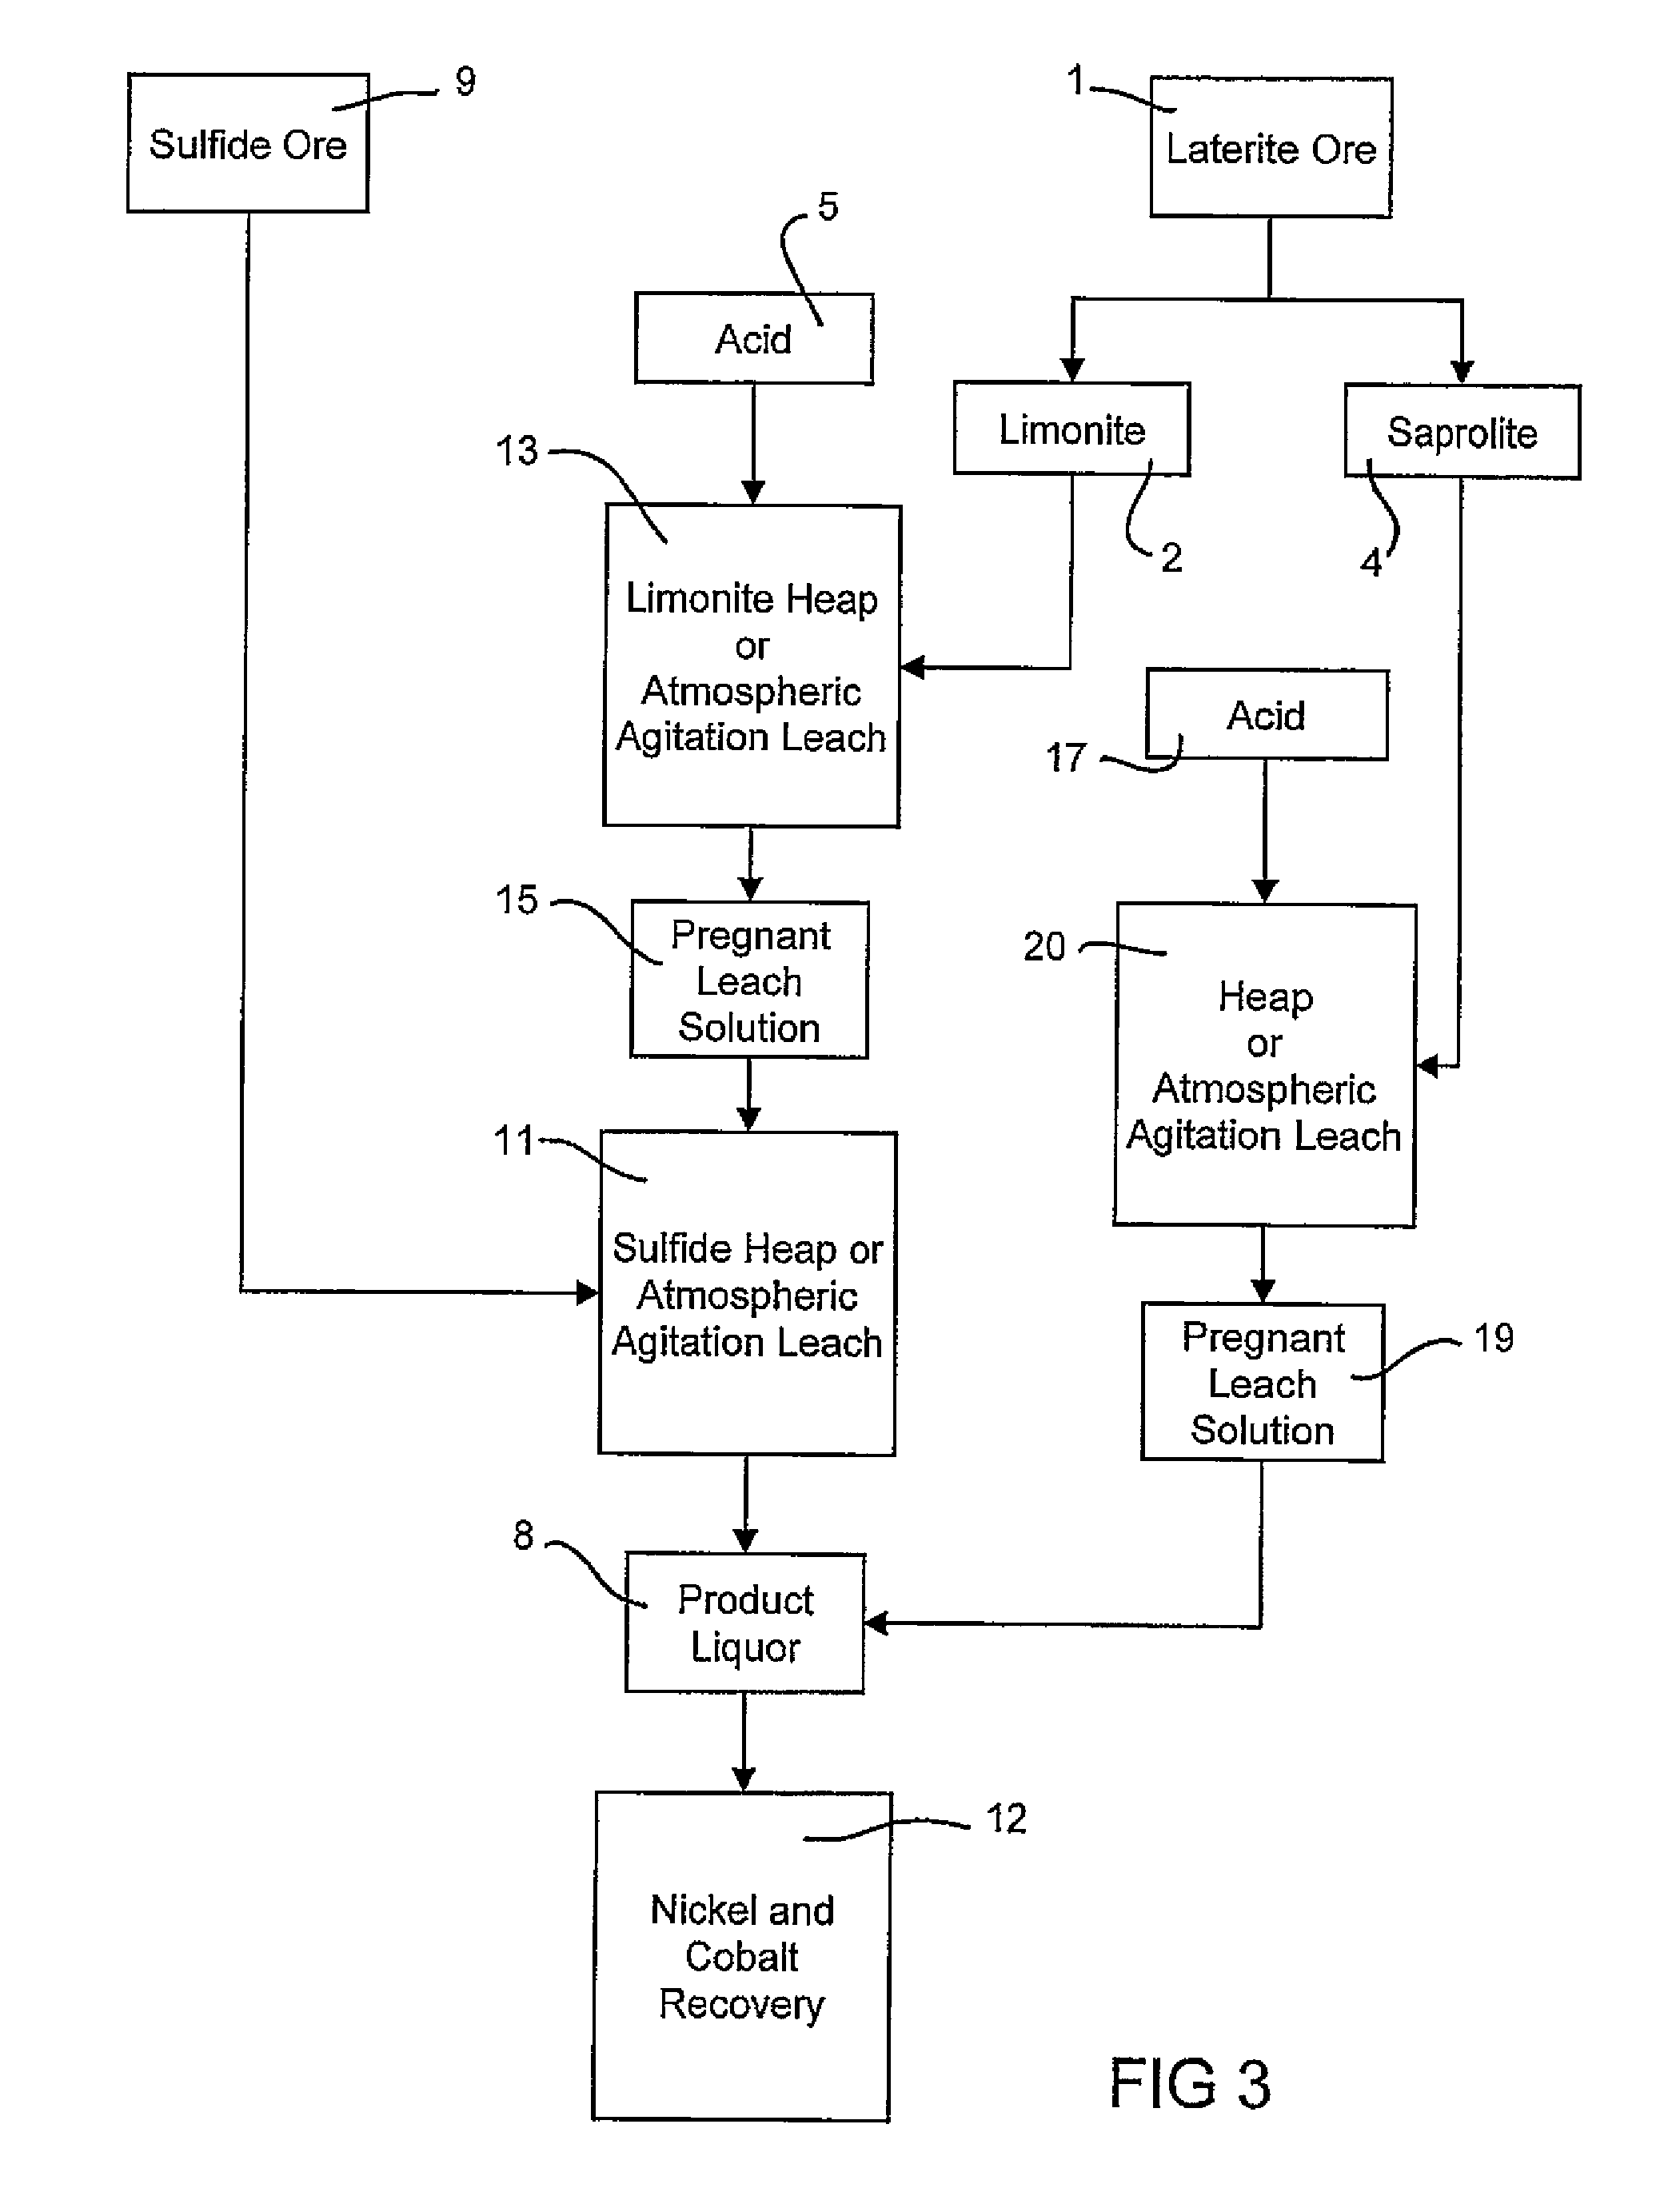 Consecutive or simultaneous leaching of nickel and cobalt containing ores